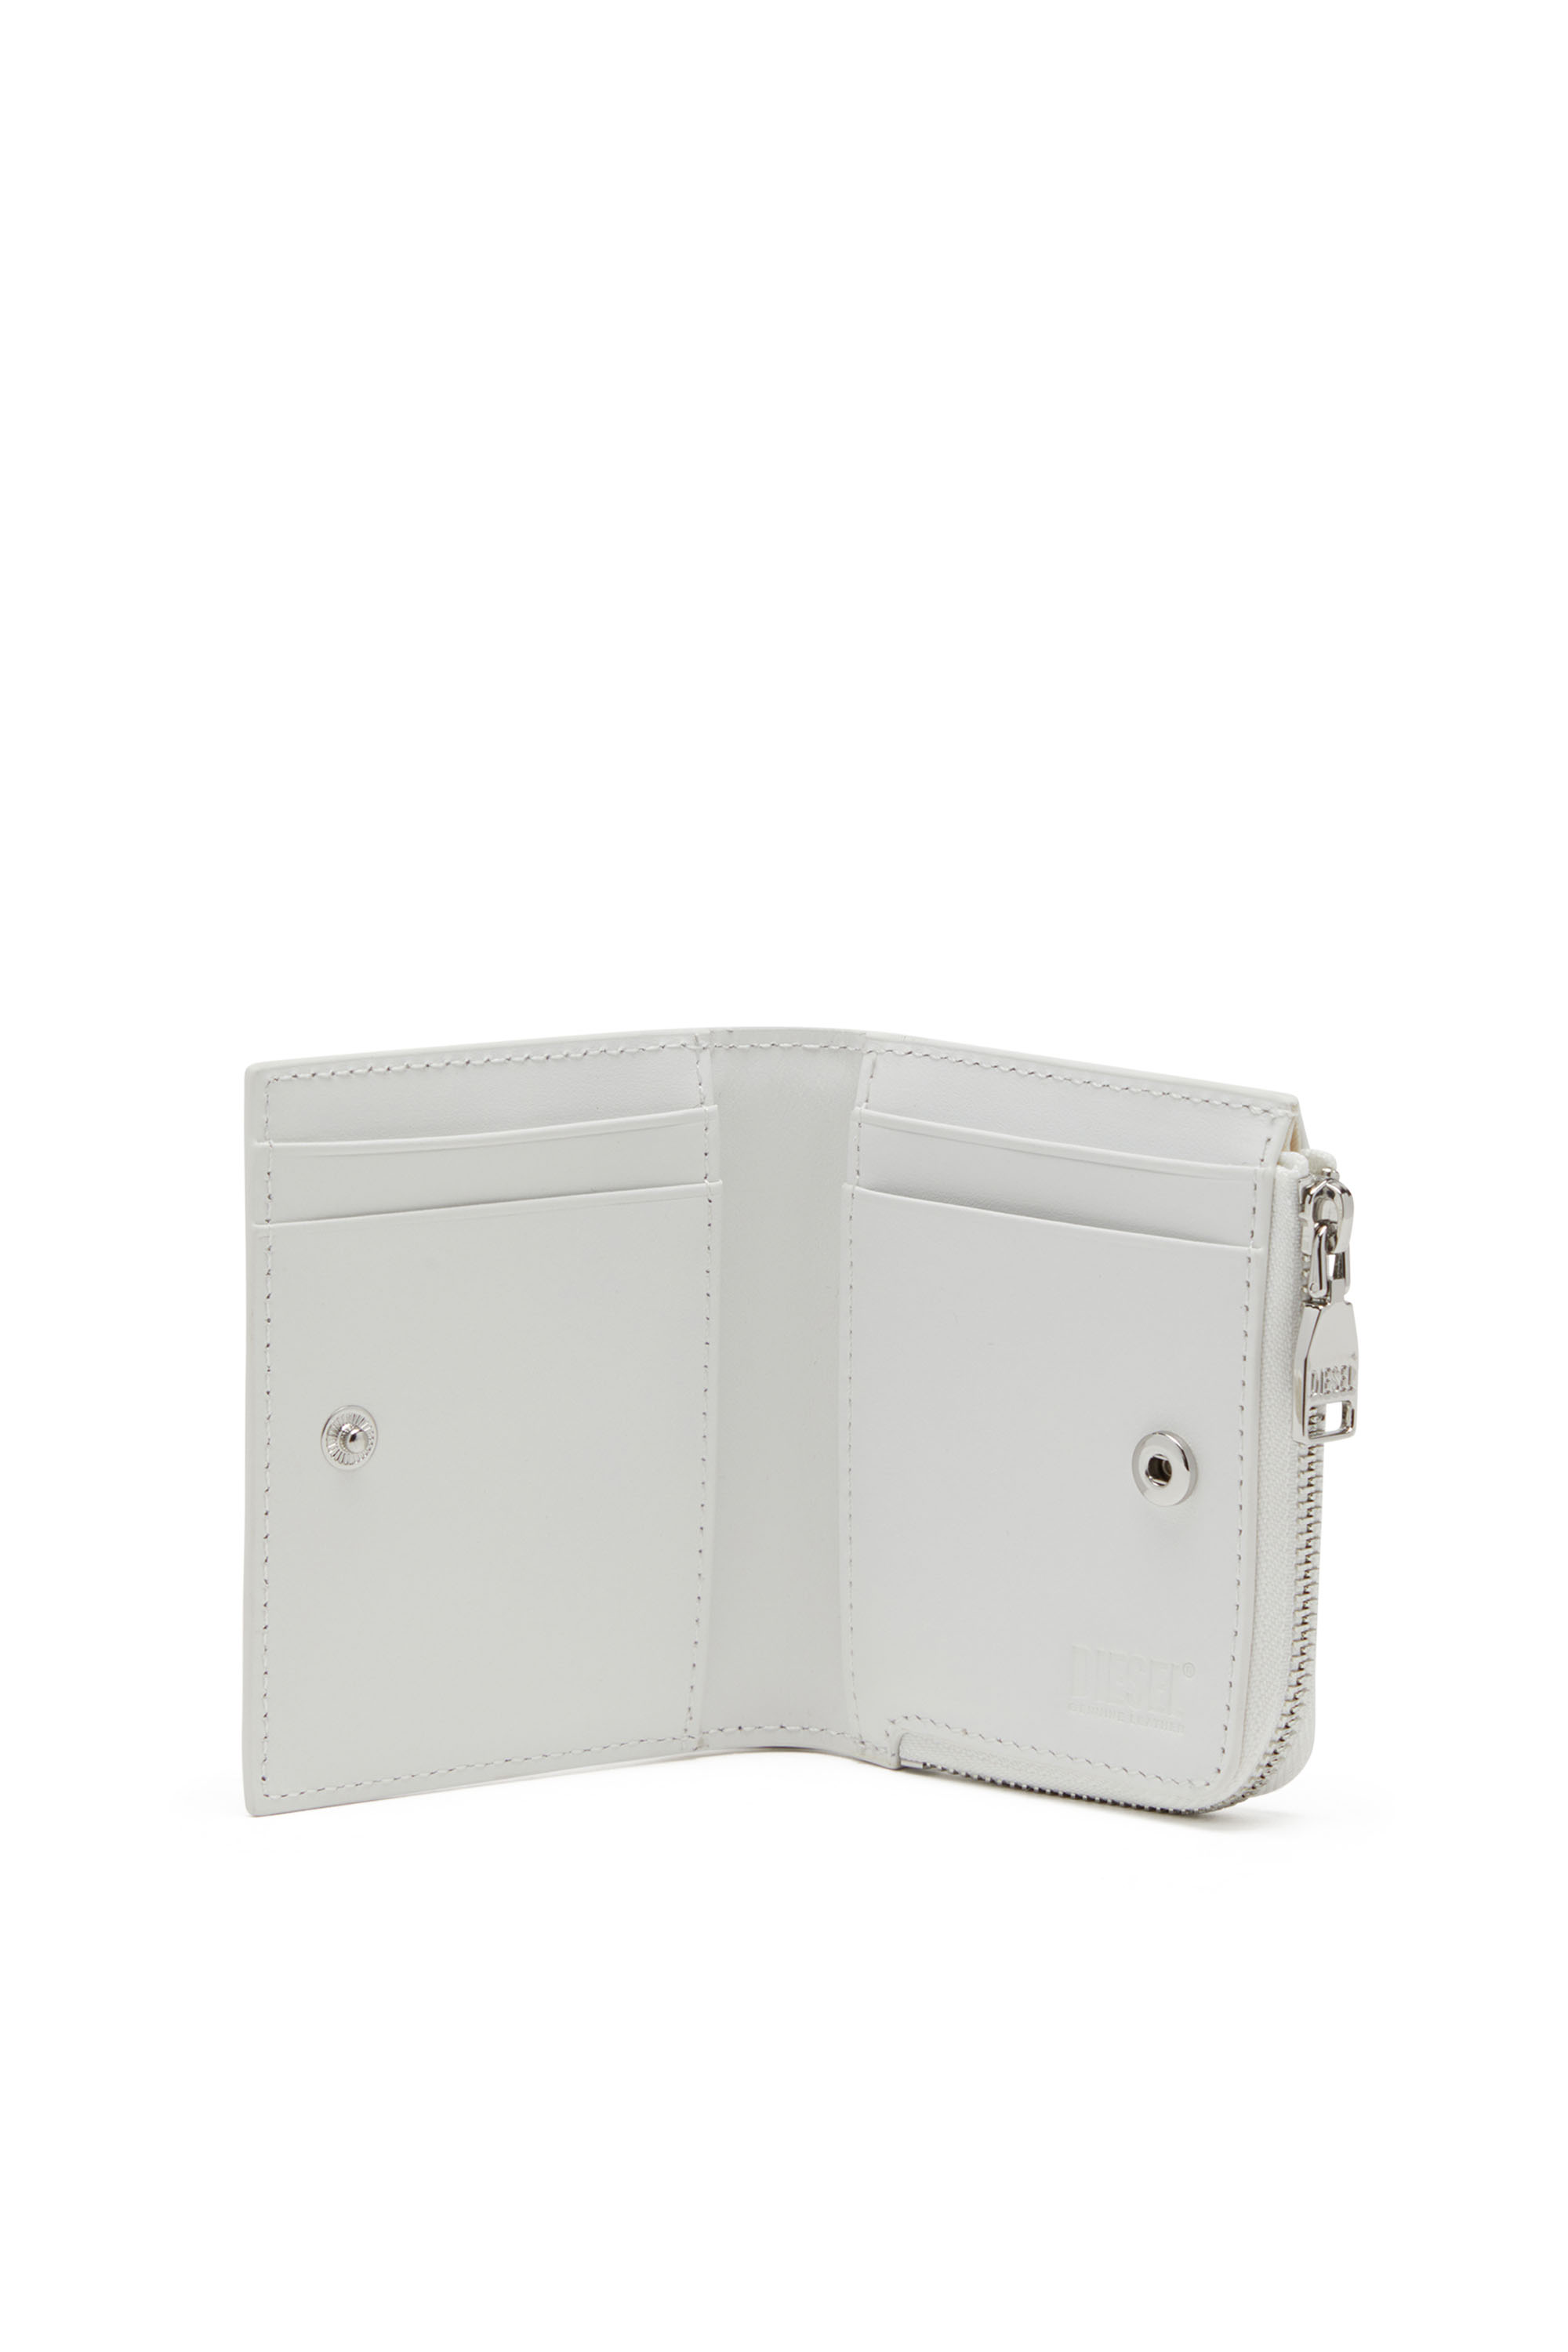 Diesel - 1DR CARD HOLDER ZIP L, Donna Portacarte a libro in nappa in Bianco - Image 3